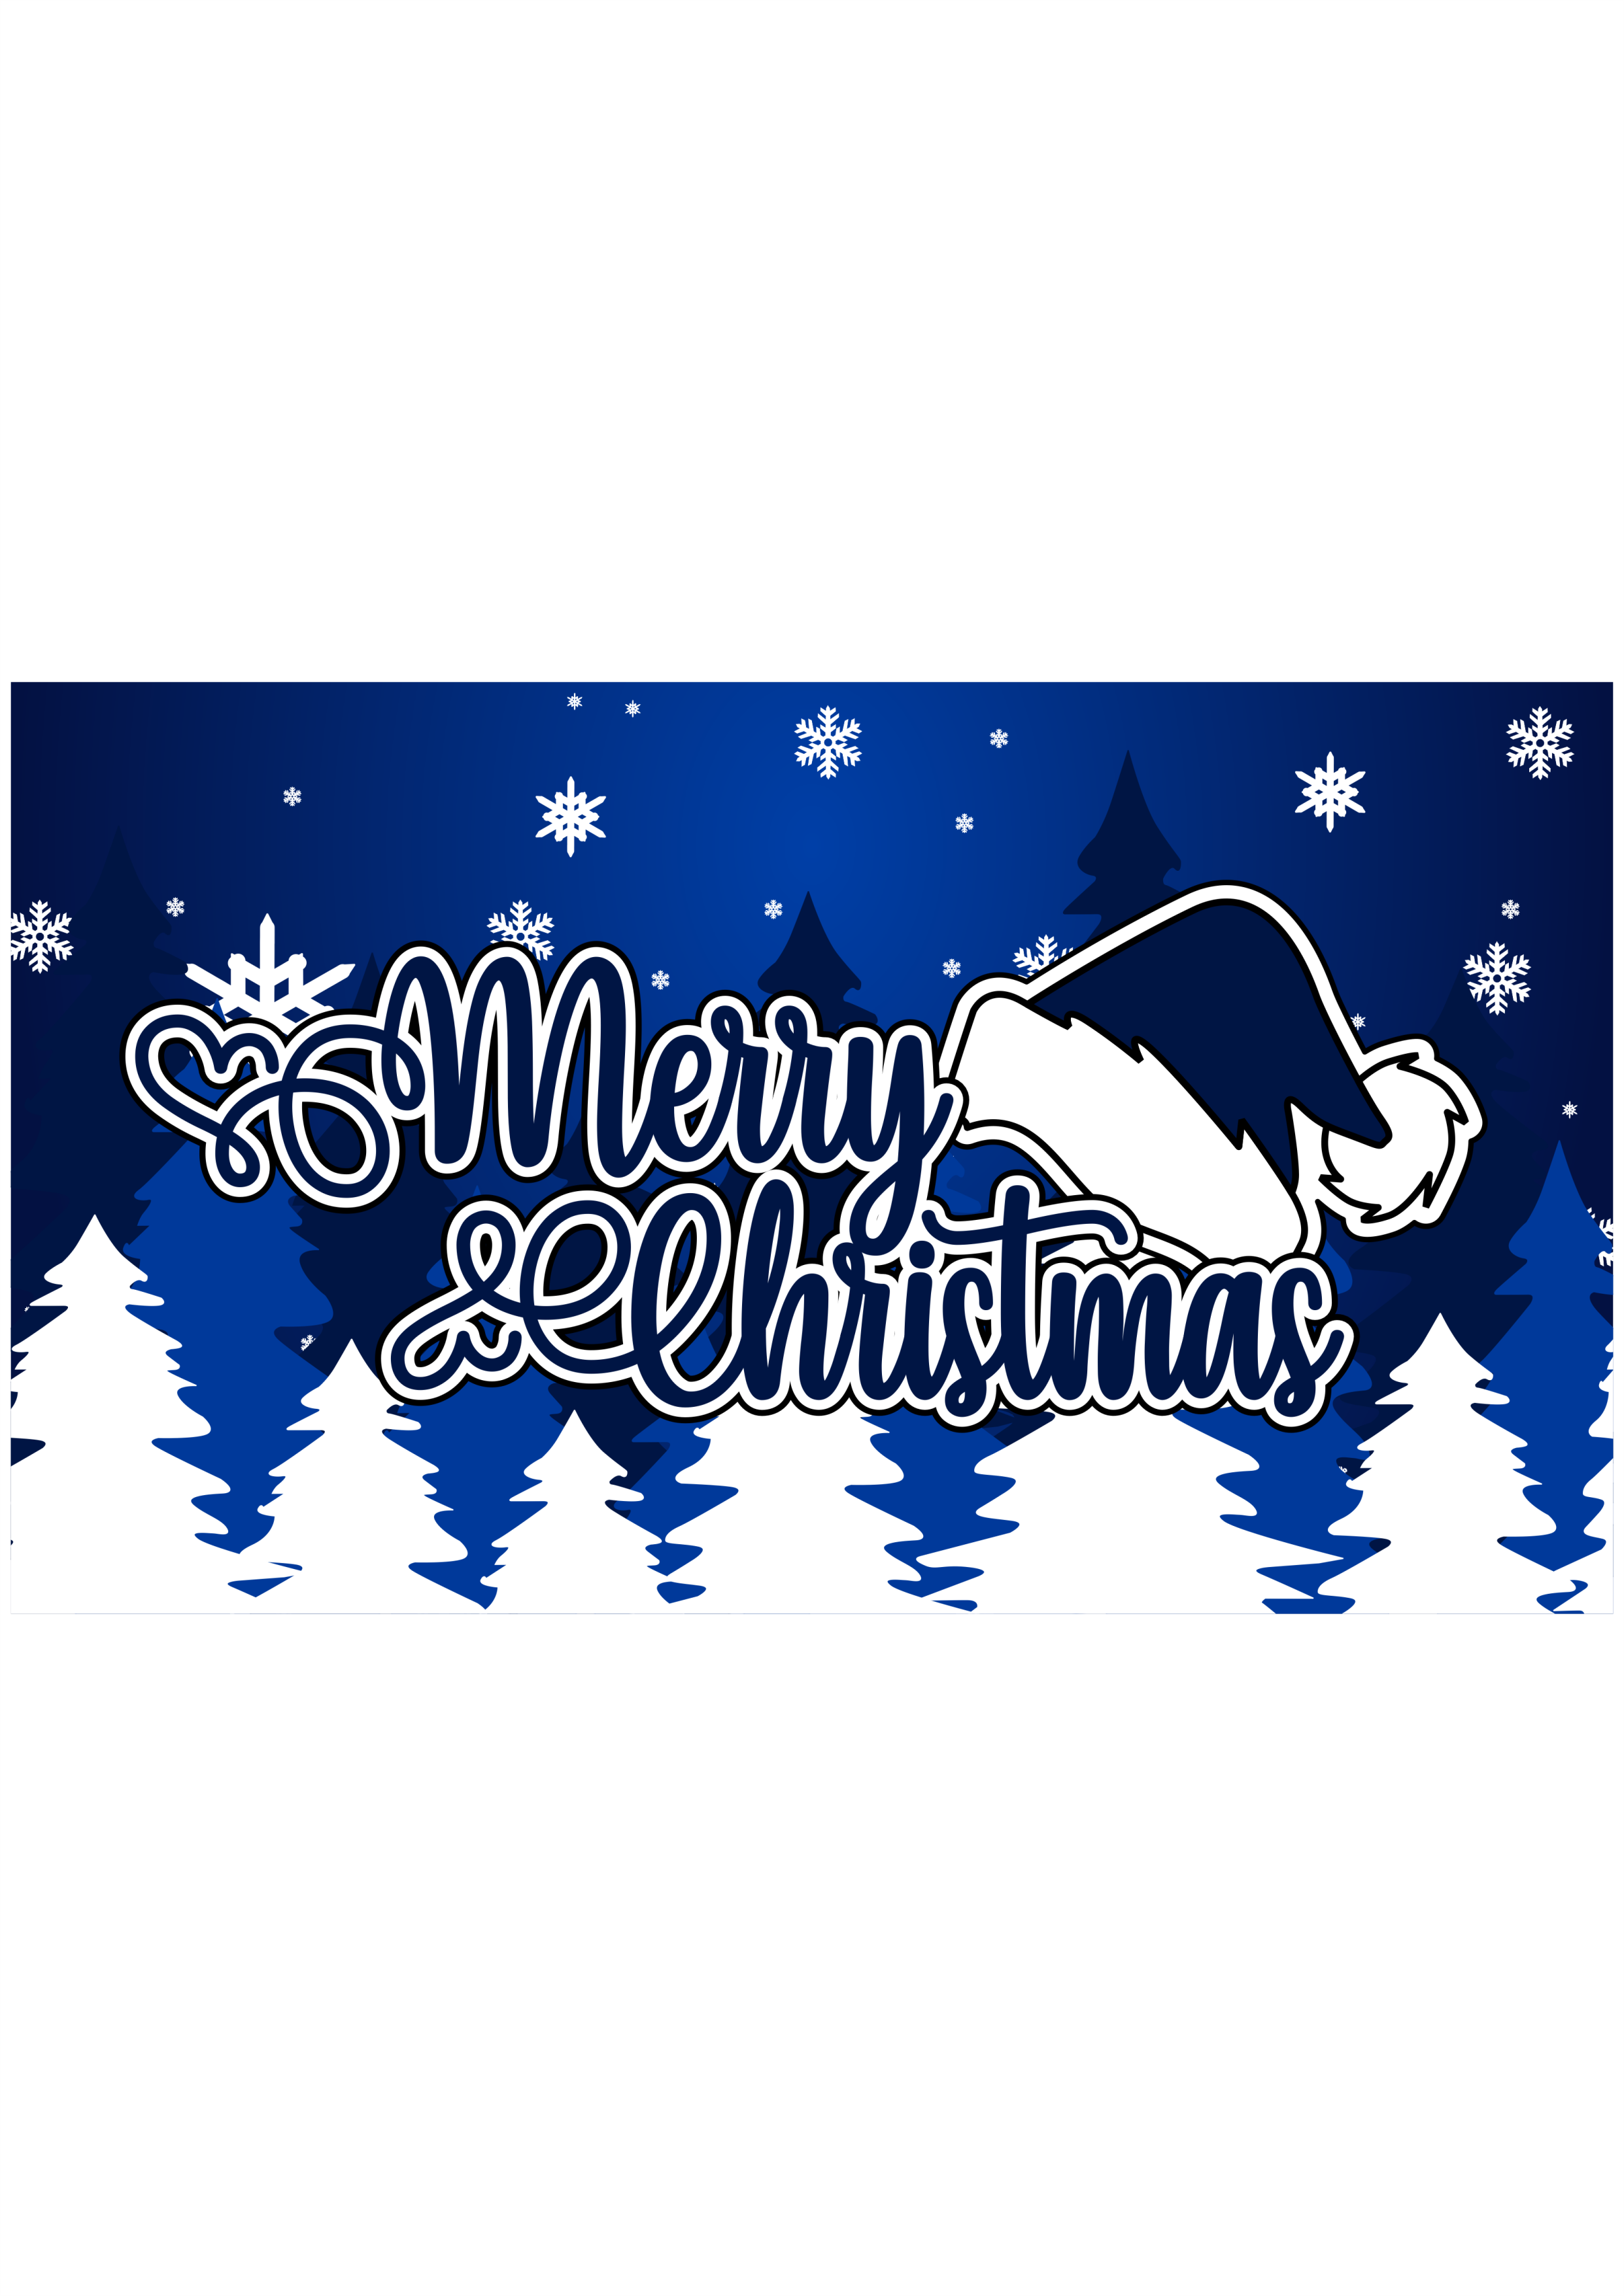 Merry Christmas night wallpaper free clipart png